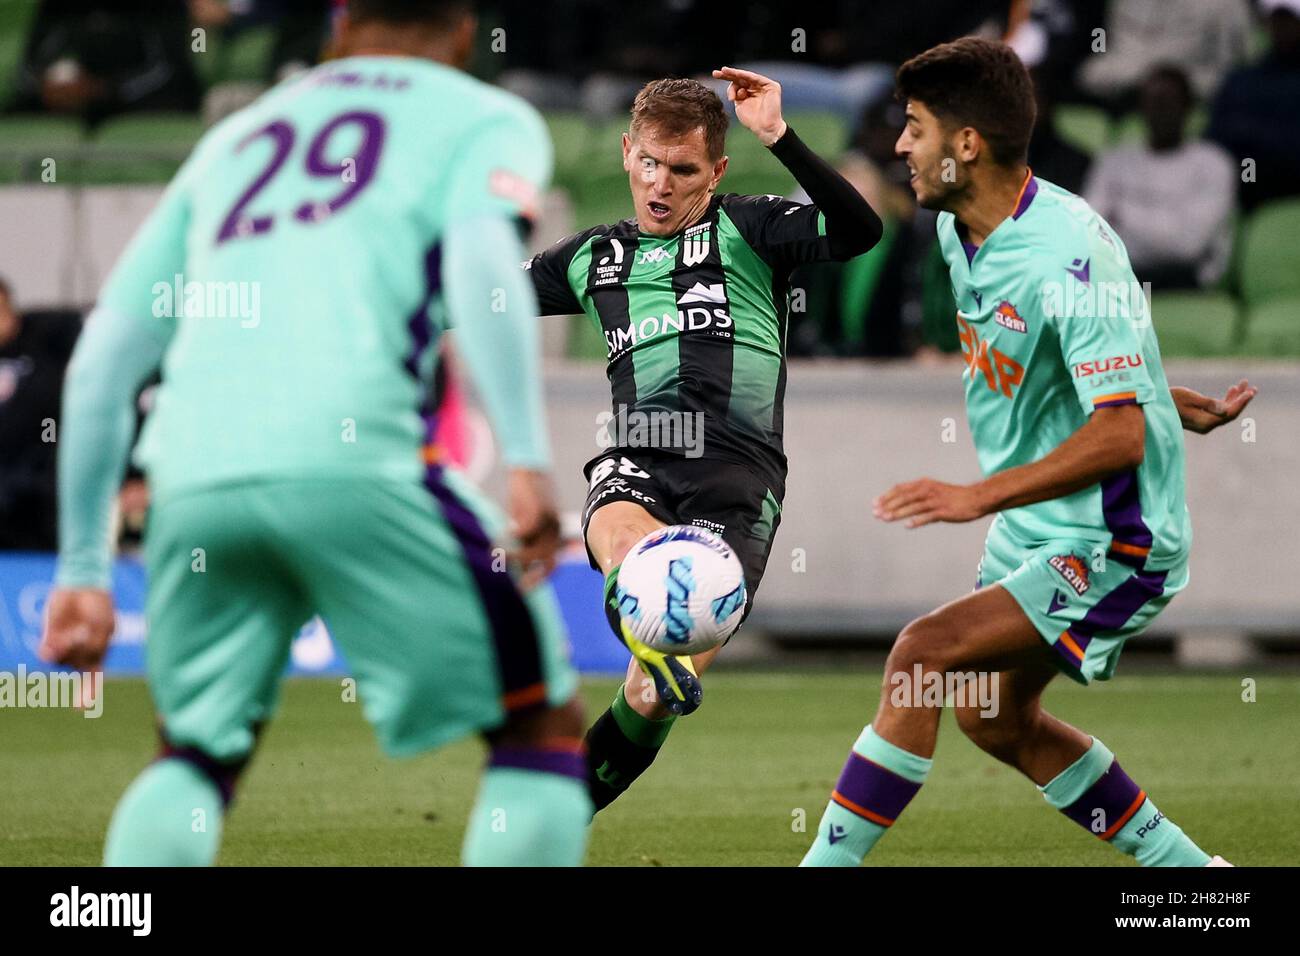 Melbourne, Australia, 26 November, 2021. Neil Kilkenny of Western United kicks the ball during the round 2 A-League soccer match between Western United FC and Perth Glory at AAMI Park on November 26, 2021 in Melbourne, Australia. Credit: Dave Hewison/Speed Media/Alamy Live News Stock Photo